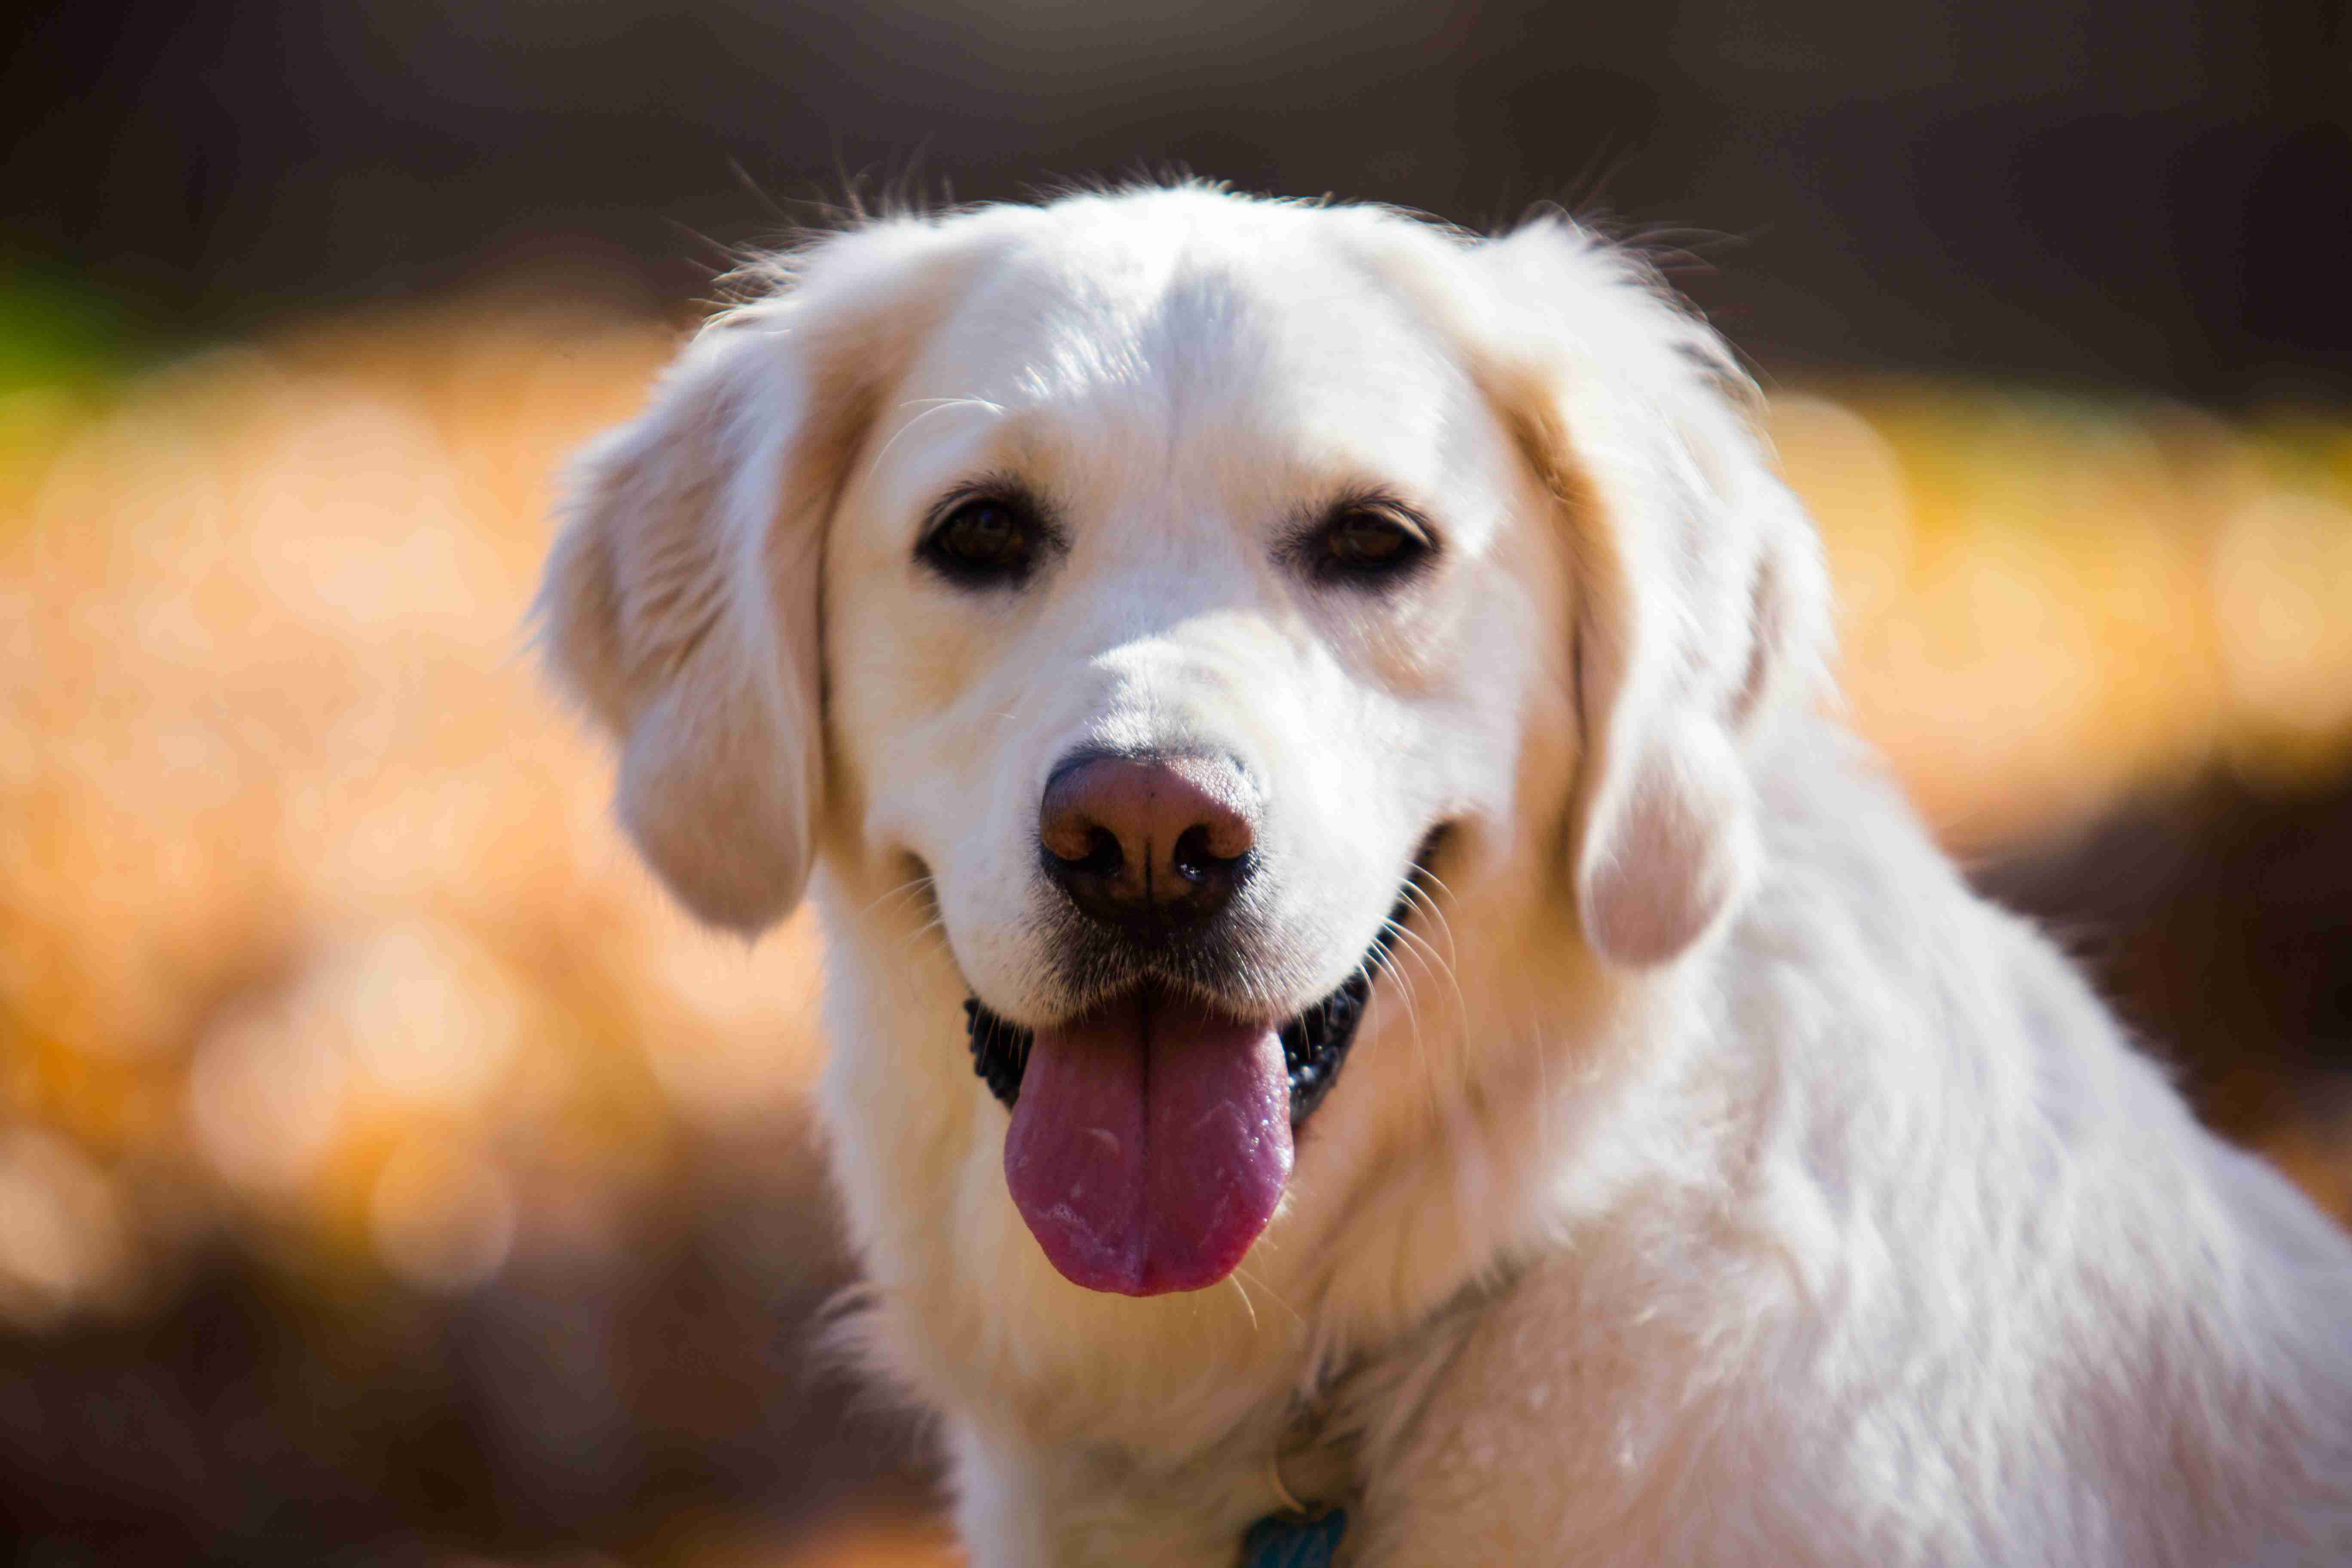 What are some signs of separation anxiety in Golden Retrievers?